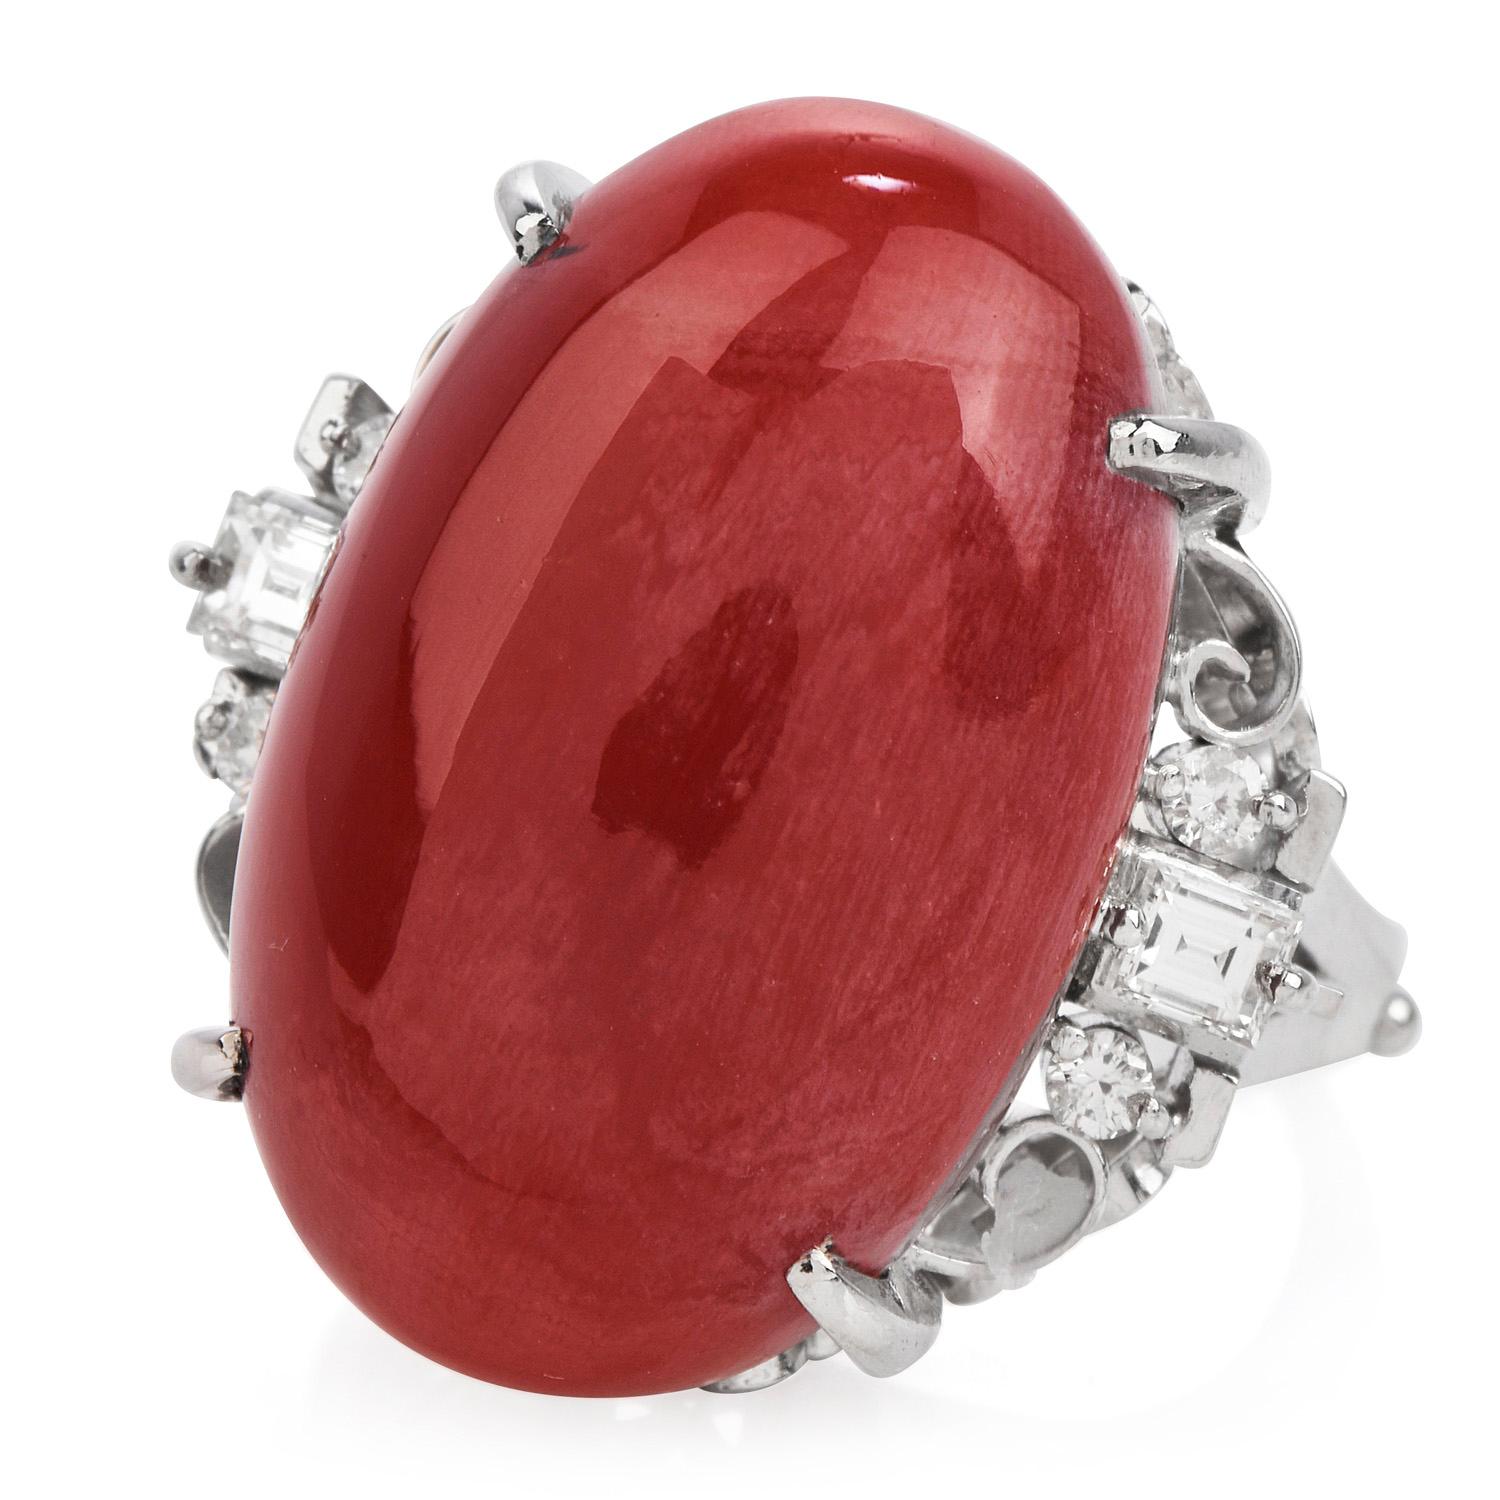 Divulge your love for natural red coral with this prominent Estate Diamond Coral 18K Gold Oval Cabochon Cocktail Ring!  

This refreshing and large ring boasts 1 Natural GIA Certified Oval Cabochon Red natural color Coral measuring 22 x 13mm,  and